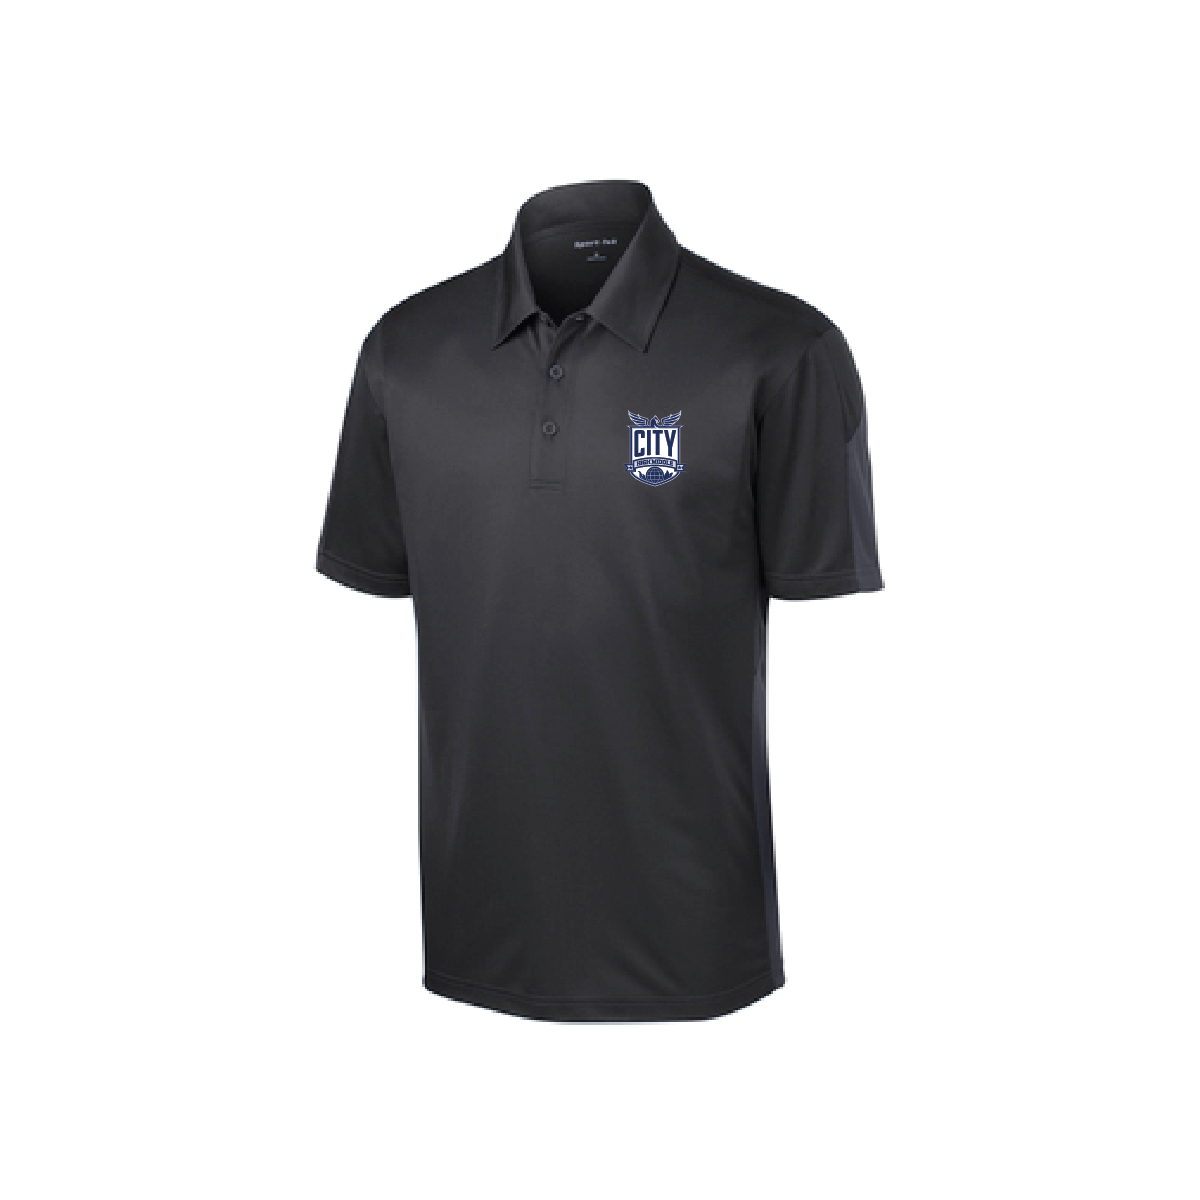 City High Middle Men's Short Sleeve Polo (ST695)